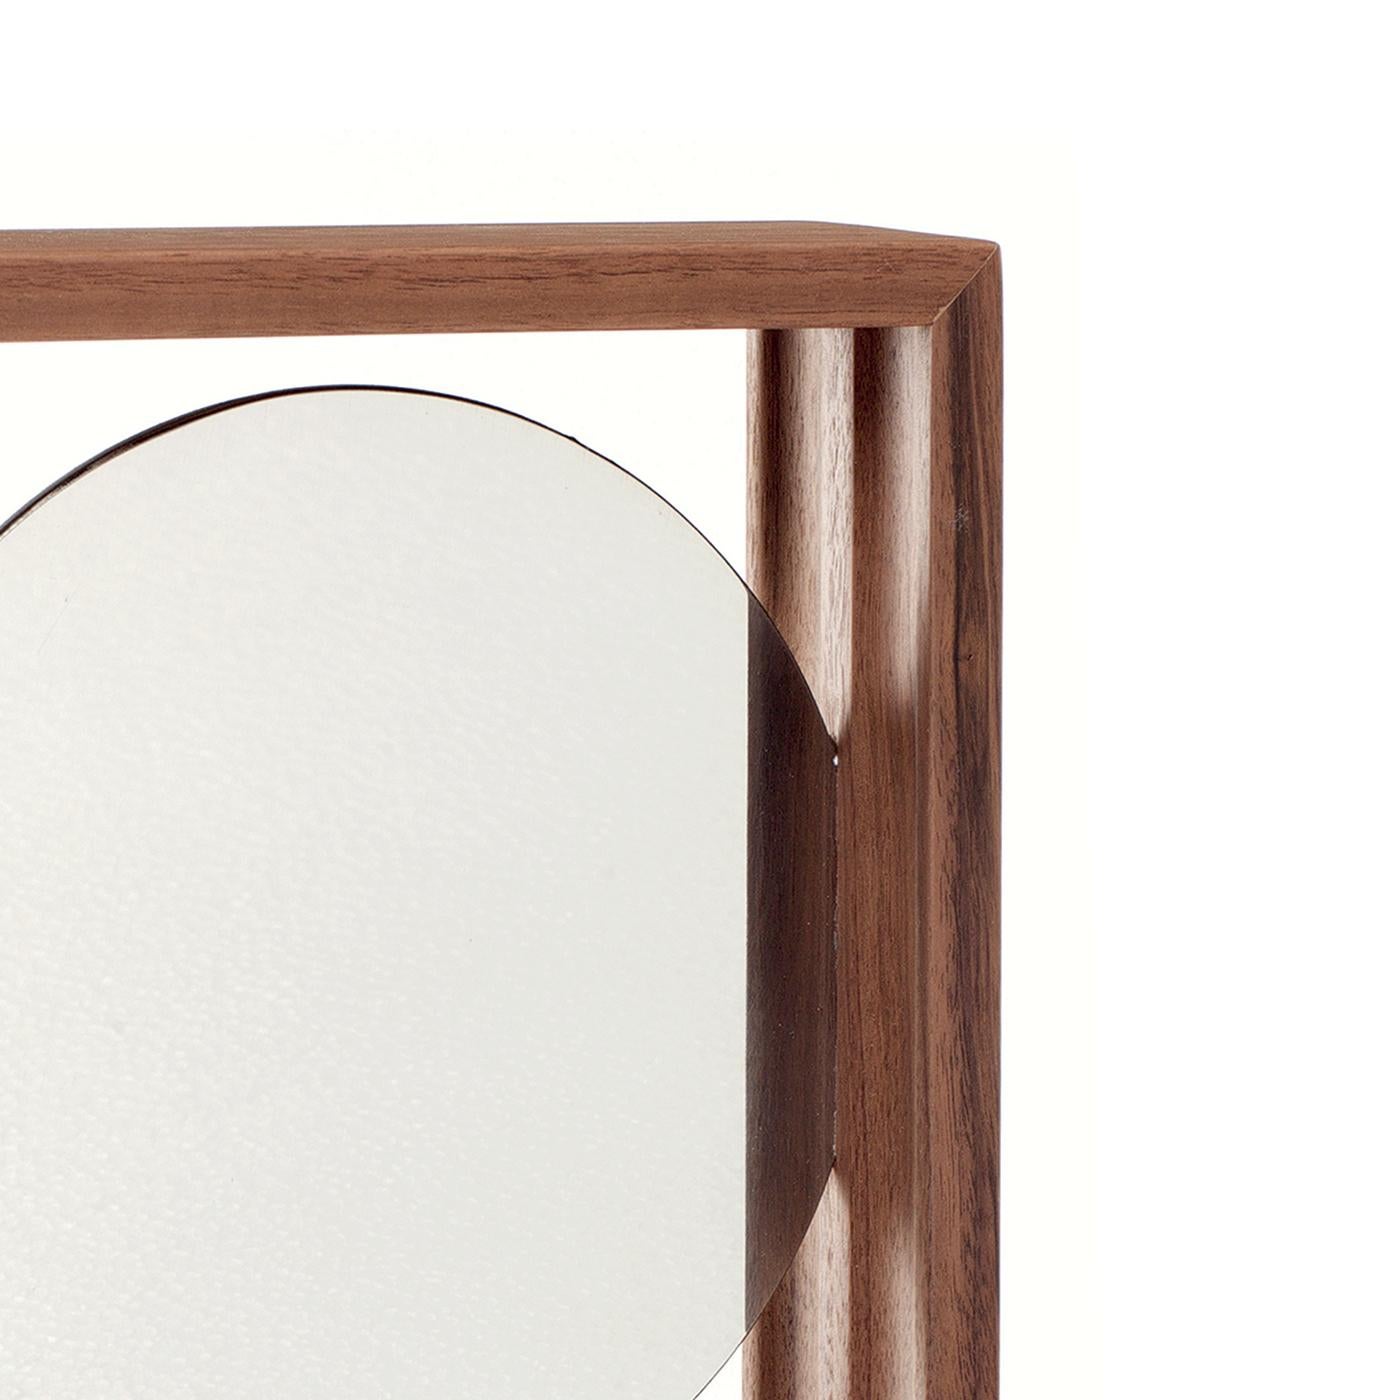 Charming in its simplicity, this round wall mirror by GumDesign will be a sophisticated addition to both traditional and contemporary decors. Enclosed in a superb frame crafted of solid Canaletto walnut with a natural finish, the round mirror partly